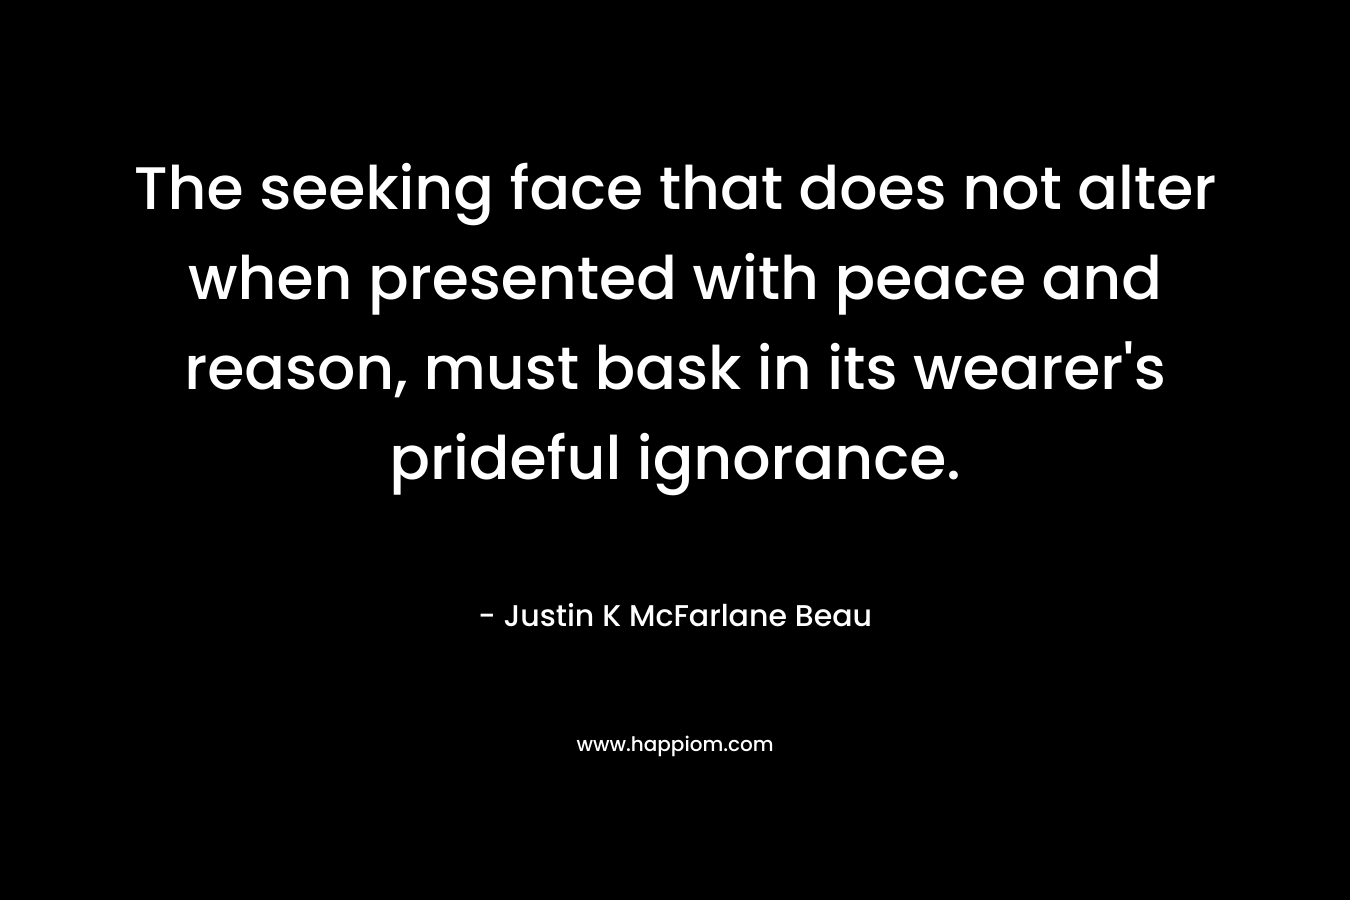 The seeking face that does not alter when presented with peace and reason, must bask in its wearer’s prideful ignorance. – Justin K McFarlane Beau